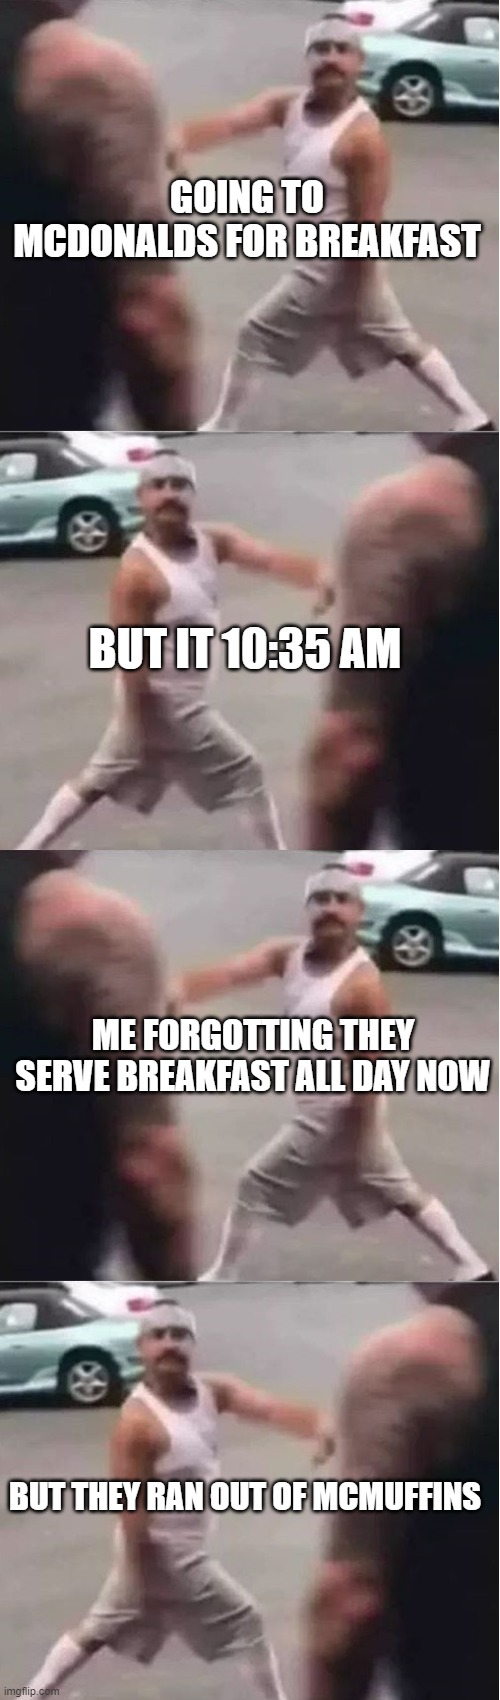 every time i go to McDonald for breakfast | GOING TO MCDONALDS FOR BREAKFAST; BUT IT 10:35 AM; ME FORGOTTING THEY SERVE BREAKFAST ALL DAY NOW; BUT THEY RAN OUT OF MCMUFFINS | image tagged in cholo walk forgot,breakfast,mcdonalds | made w/ Imgflip meme maker